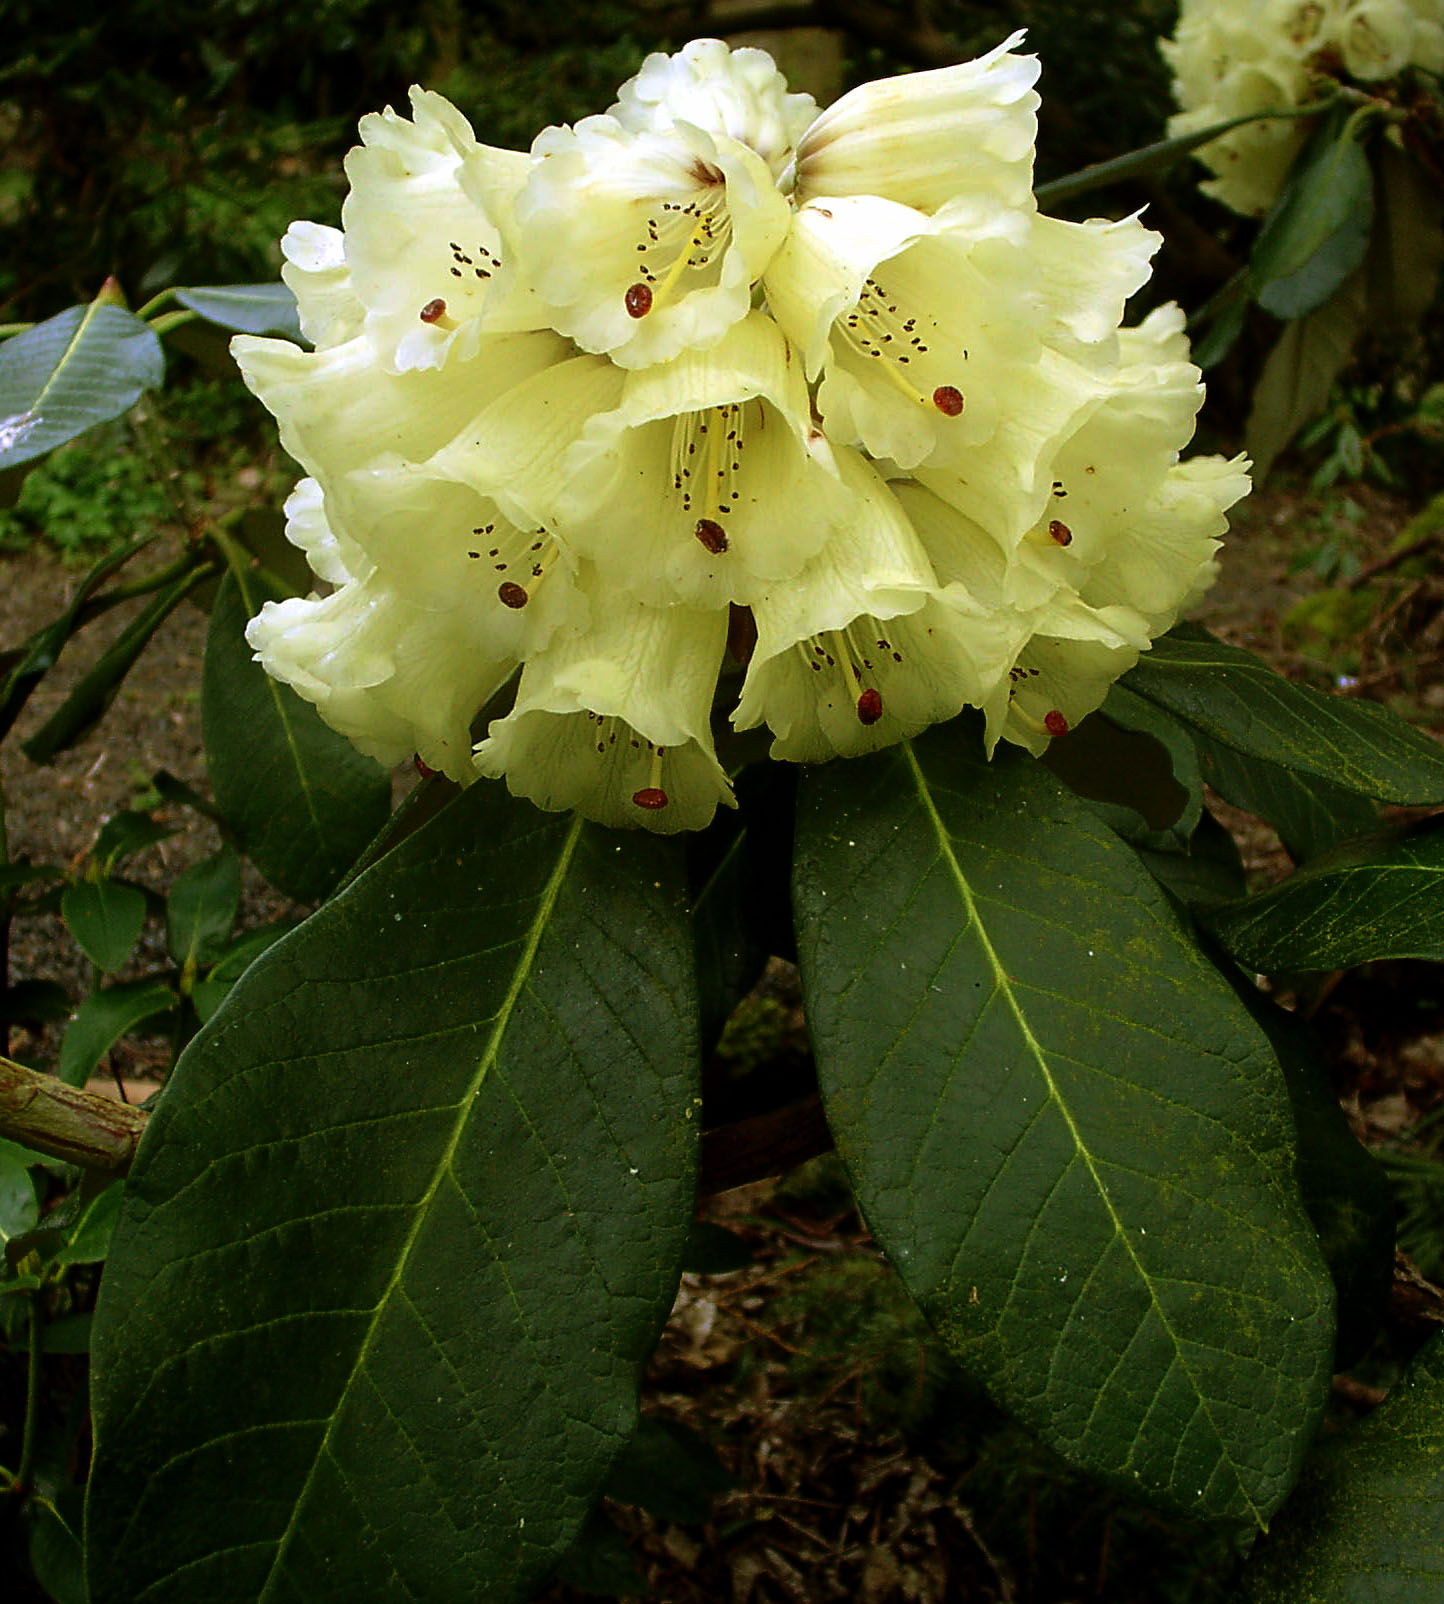 MACABEANUM hp Rhododendron Larger Species Rhododendrons